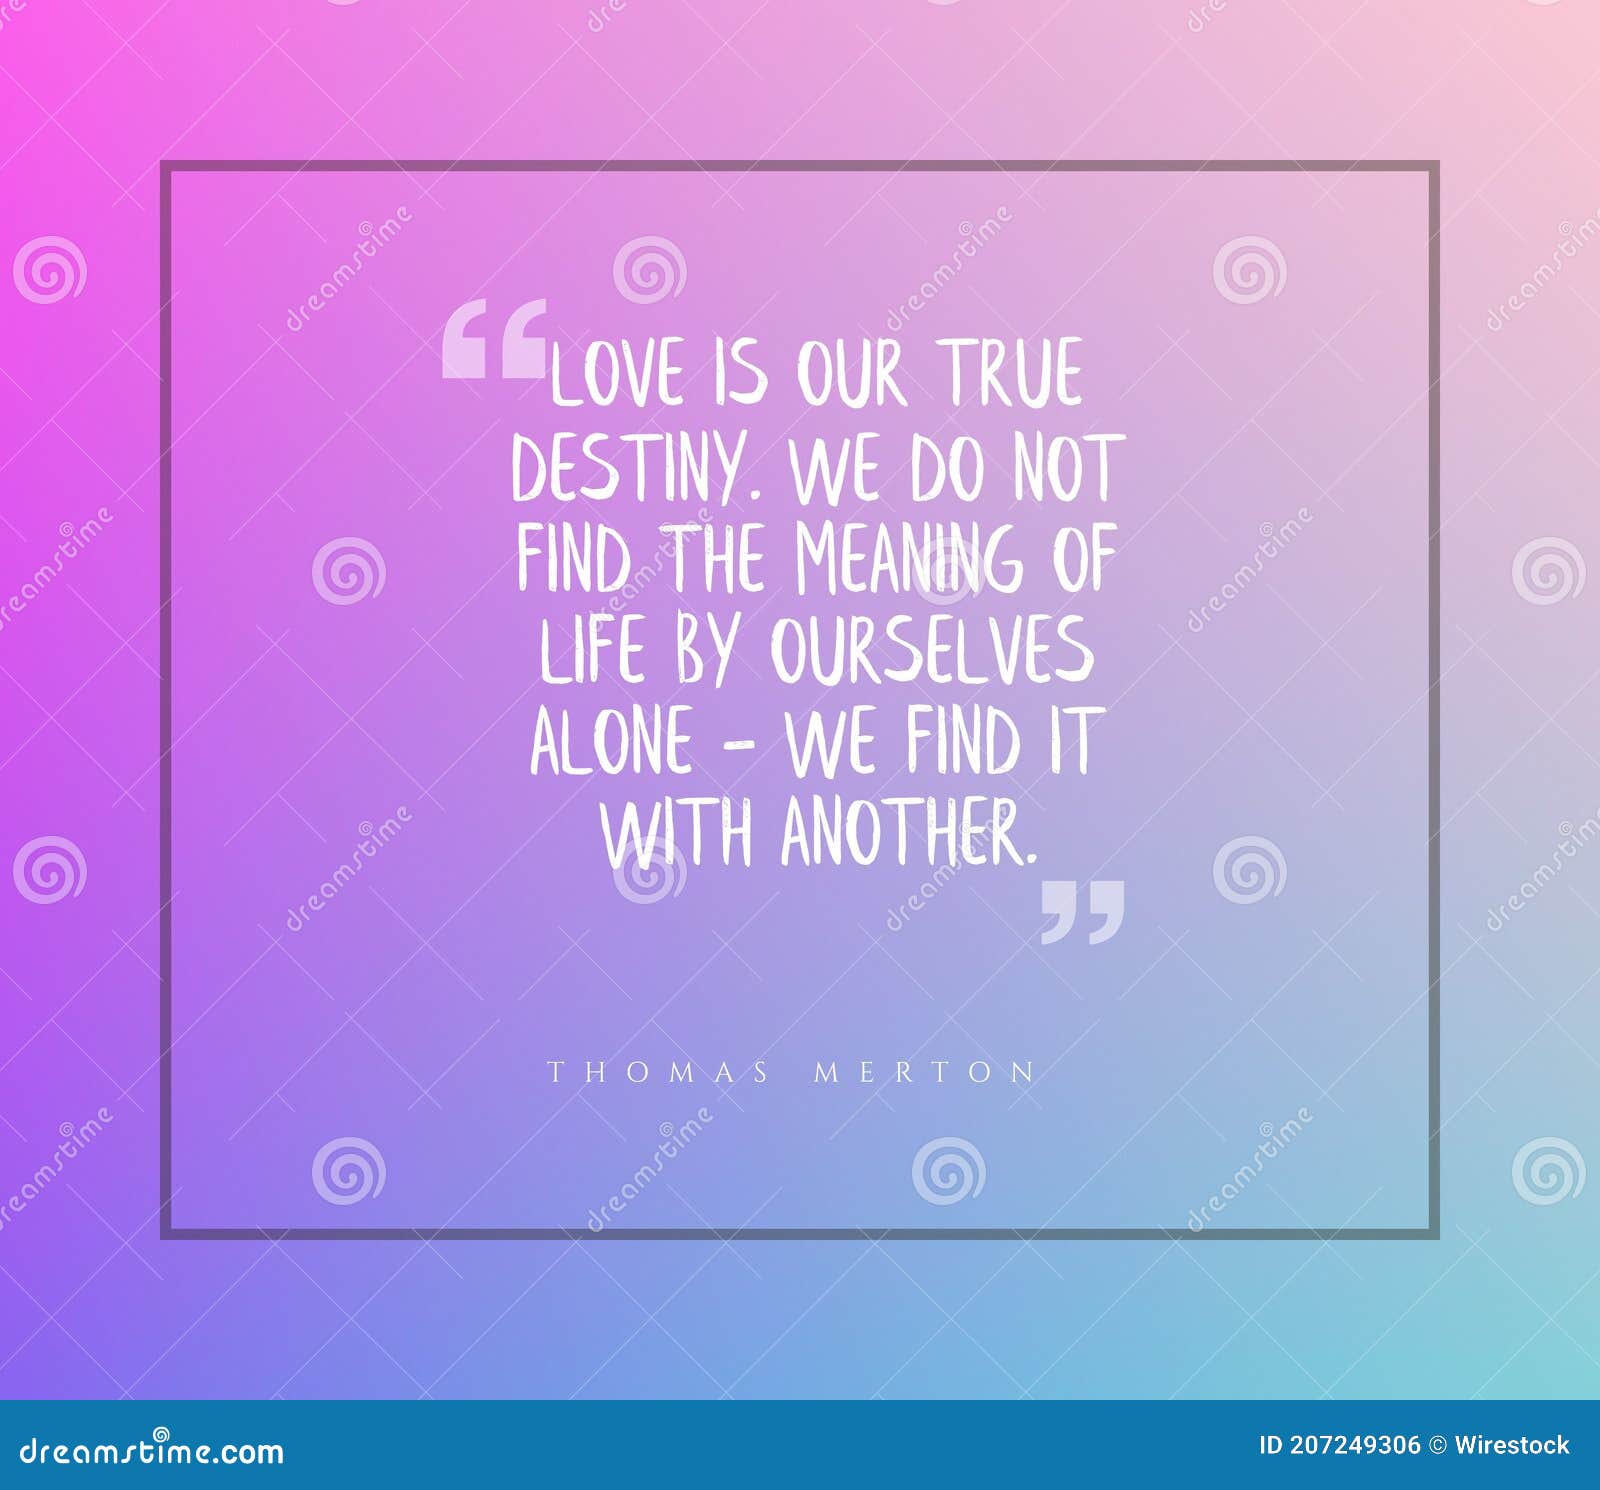 https://thumbs.dreamstime.com/z/quote-love-our-destiny-don-t-find-meaning-life-ourselves-find-another-quote-love-our-destiny-don-t-207249306.jpg